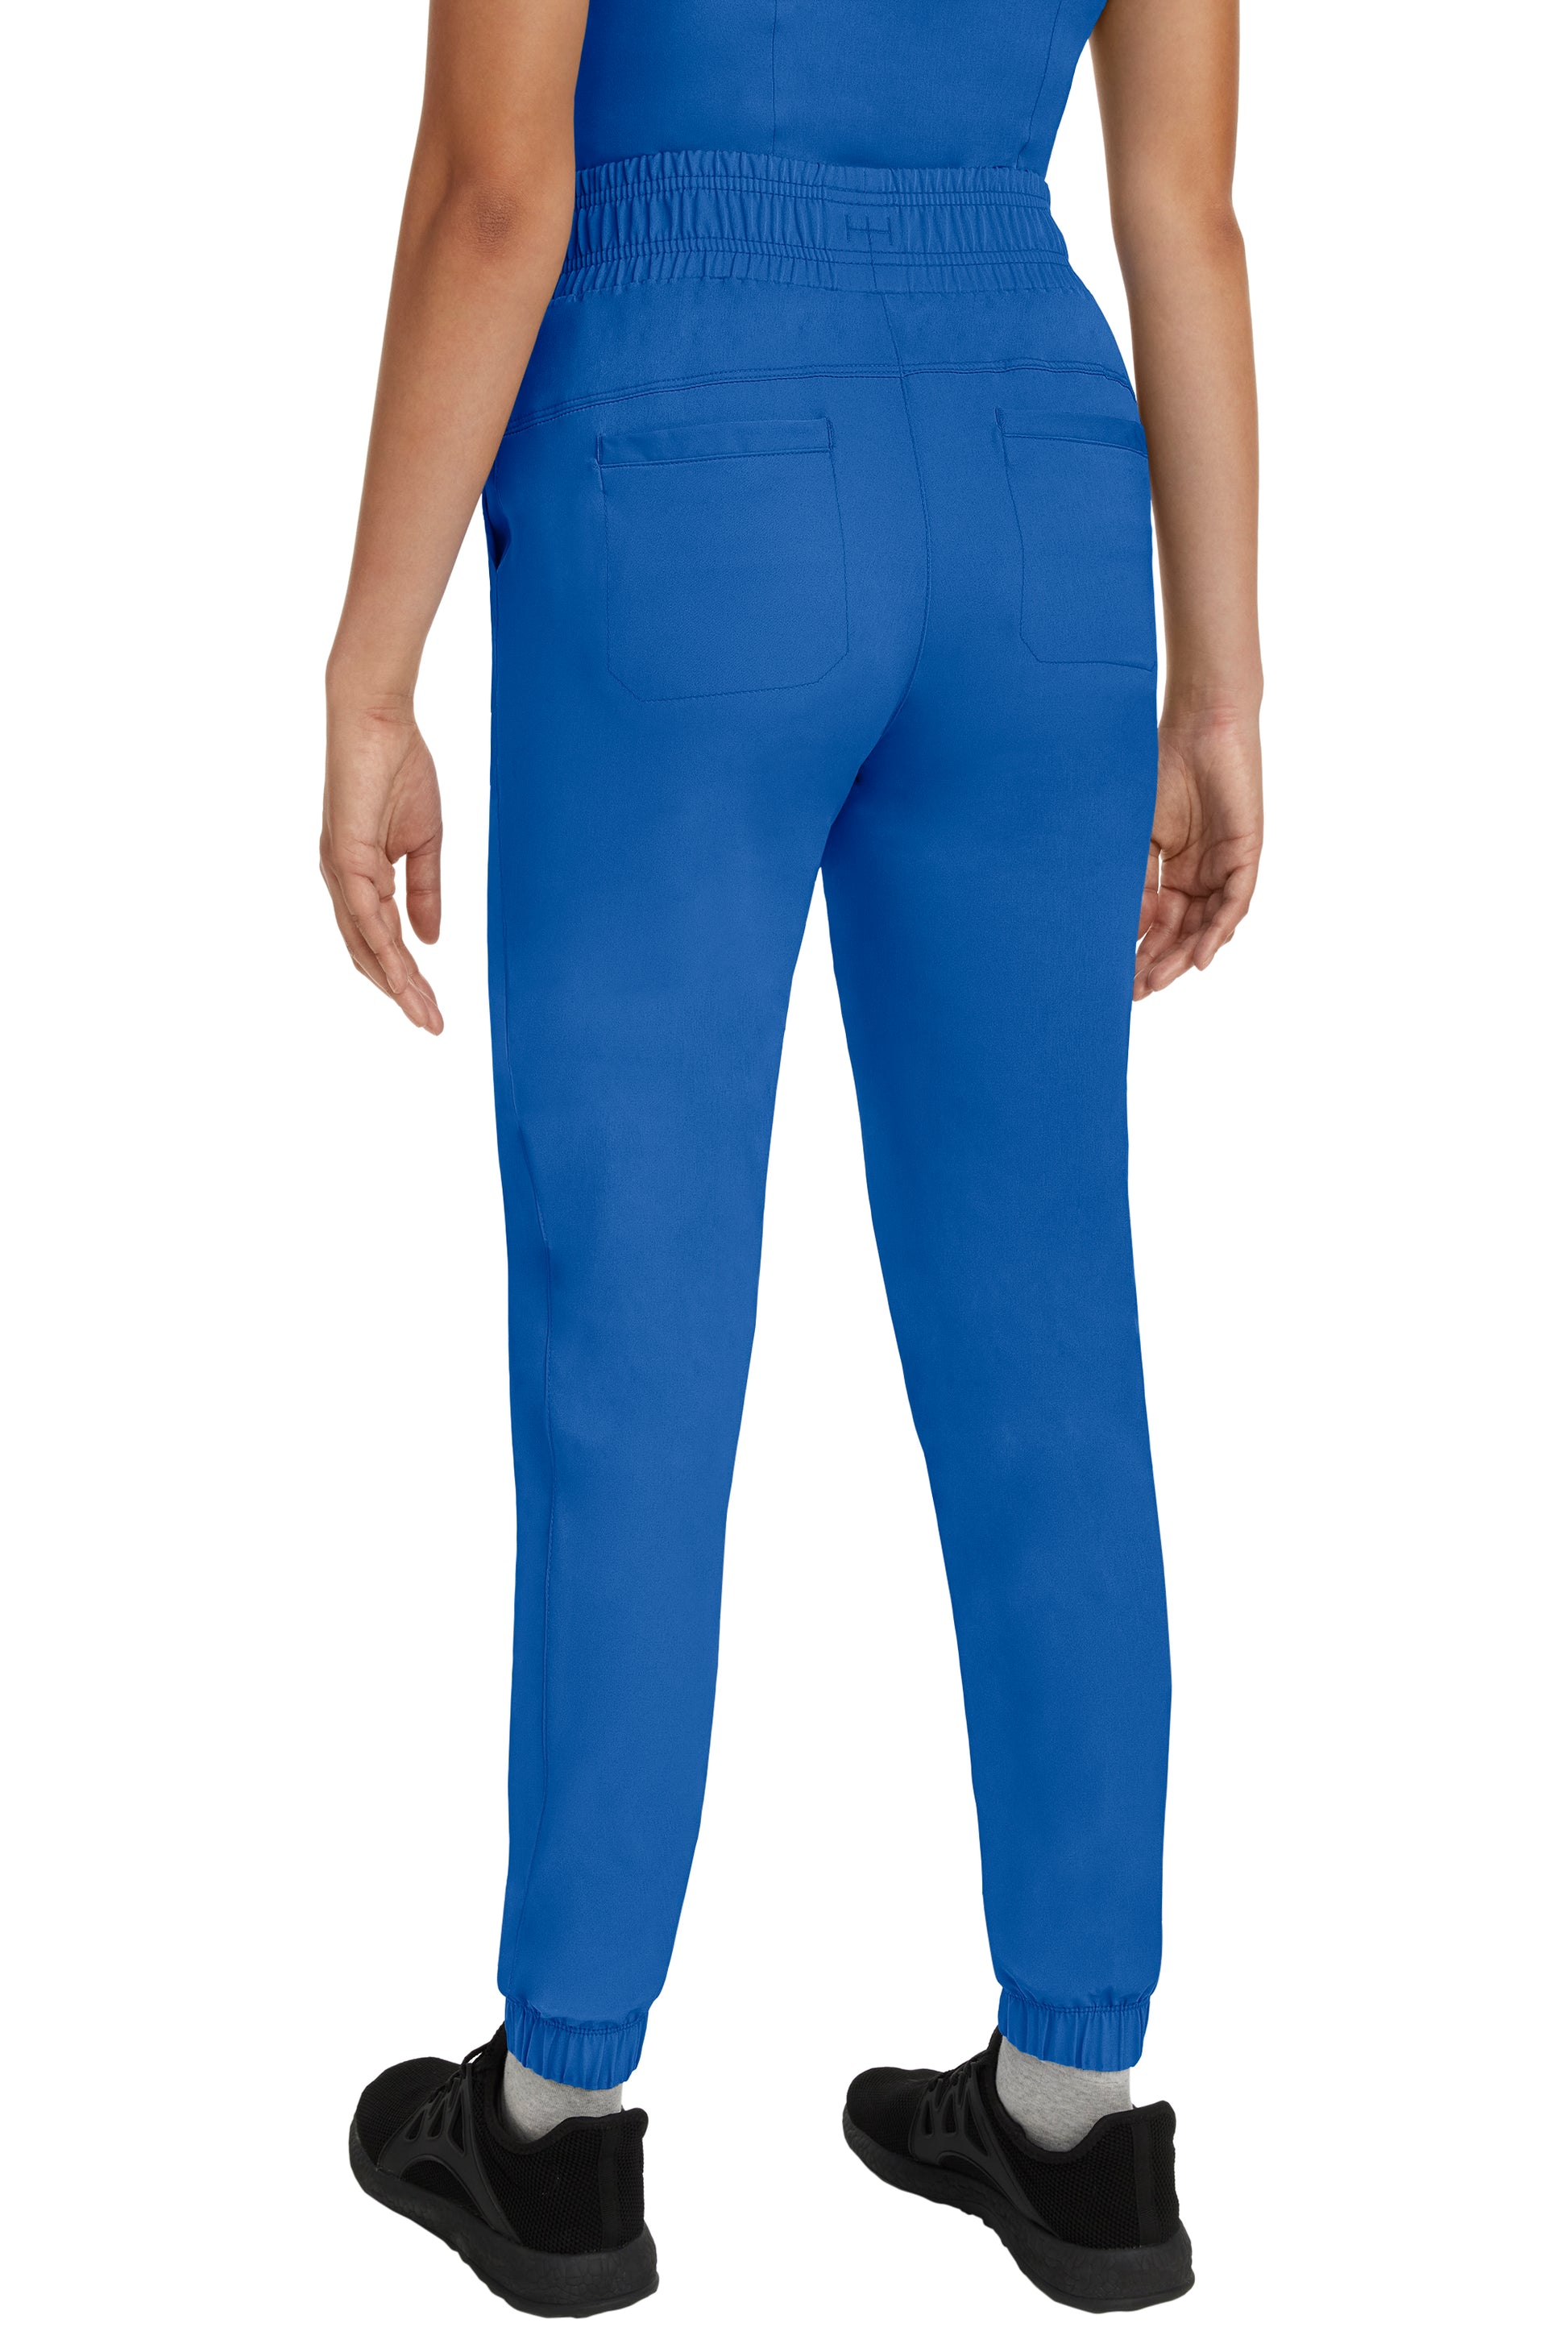 Healing Hands HH Works 9575 Renee Jogger Pant - TALL – Valley West Uniforms